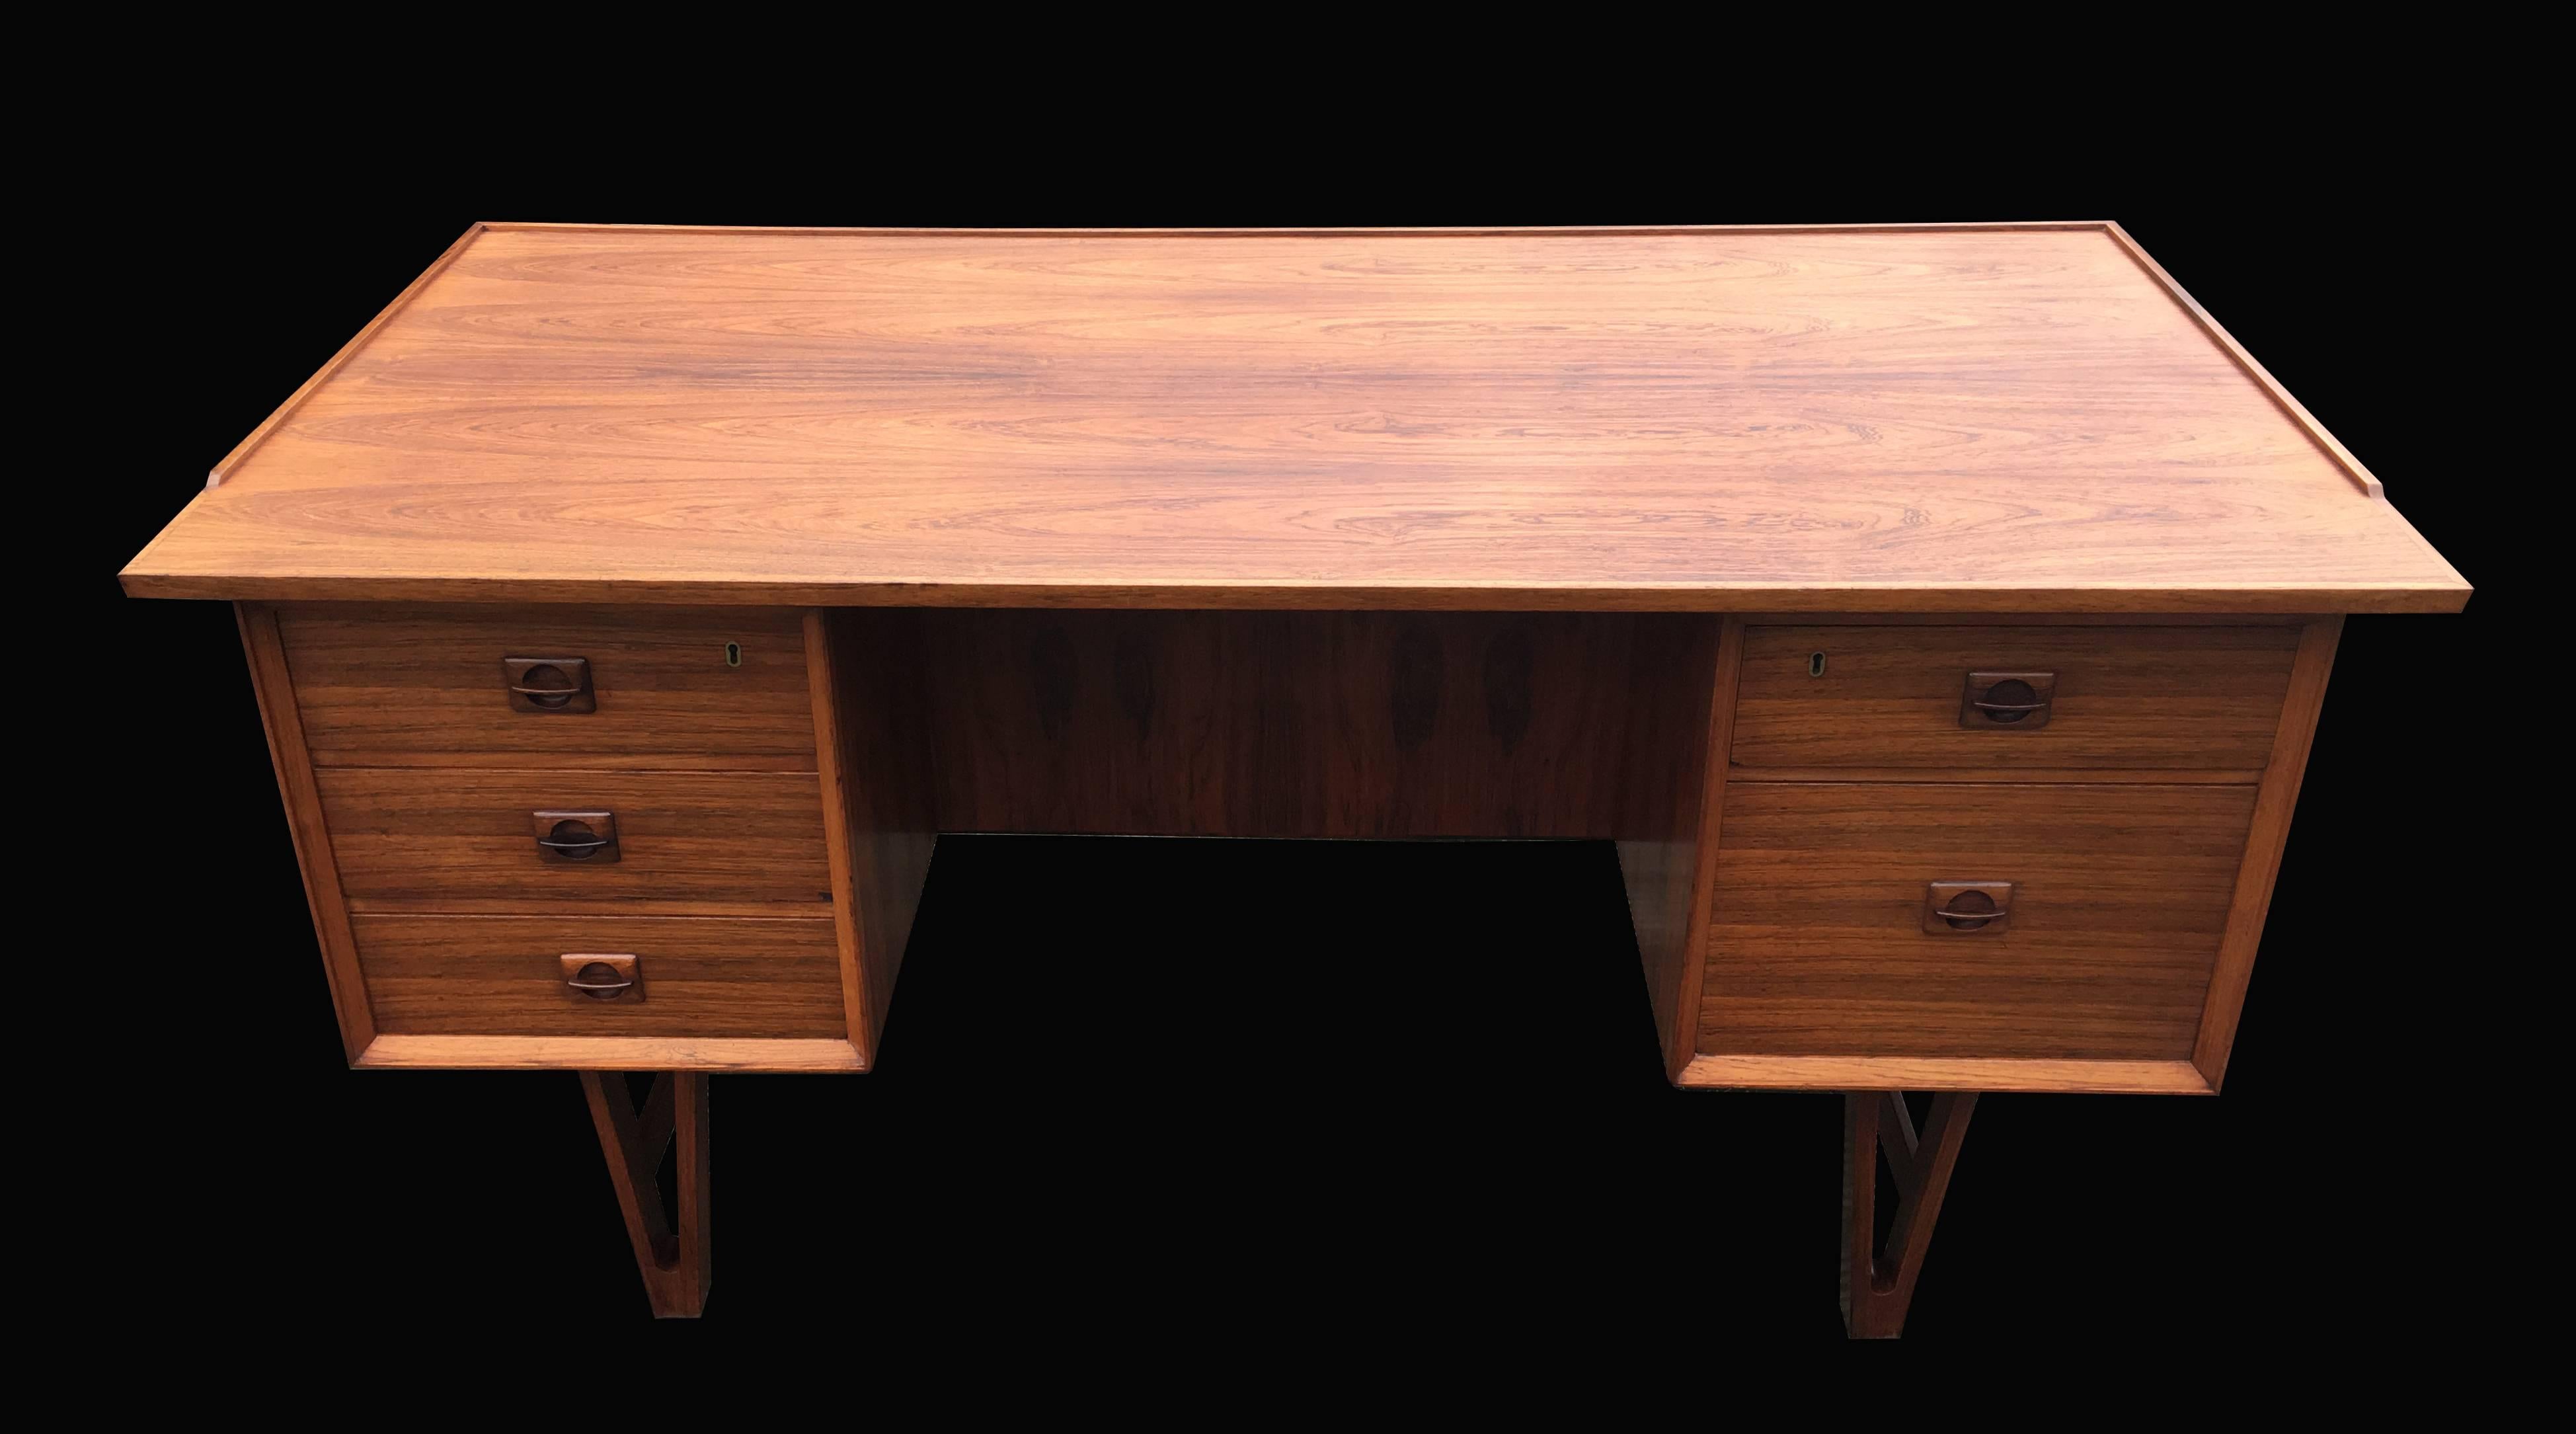 A super little unusual Danish rosewood desk with open 'V' shaped legs, three drawers on the left and one large and one small on the right, and open cupboards either side of the reverse side and a mirror back cupboard in the center.
All has been